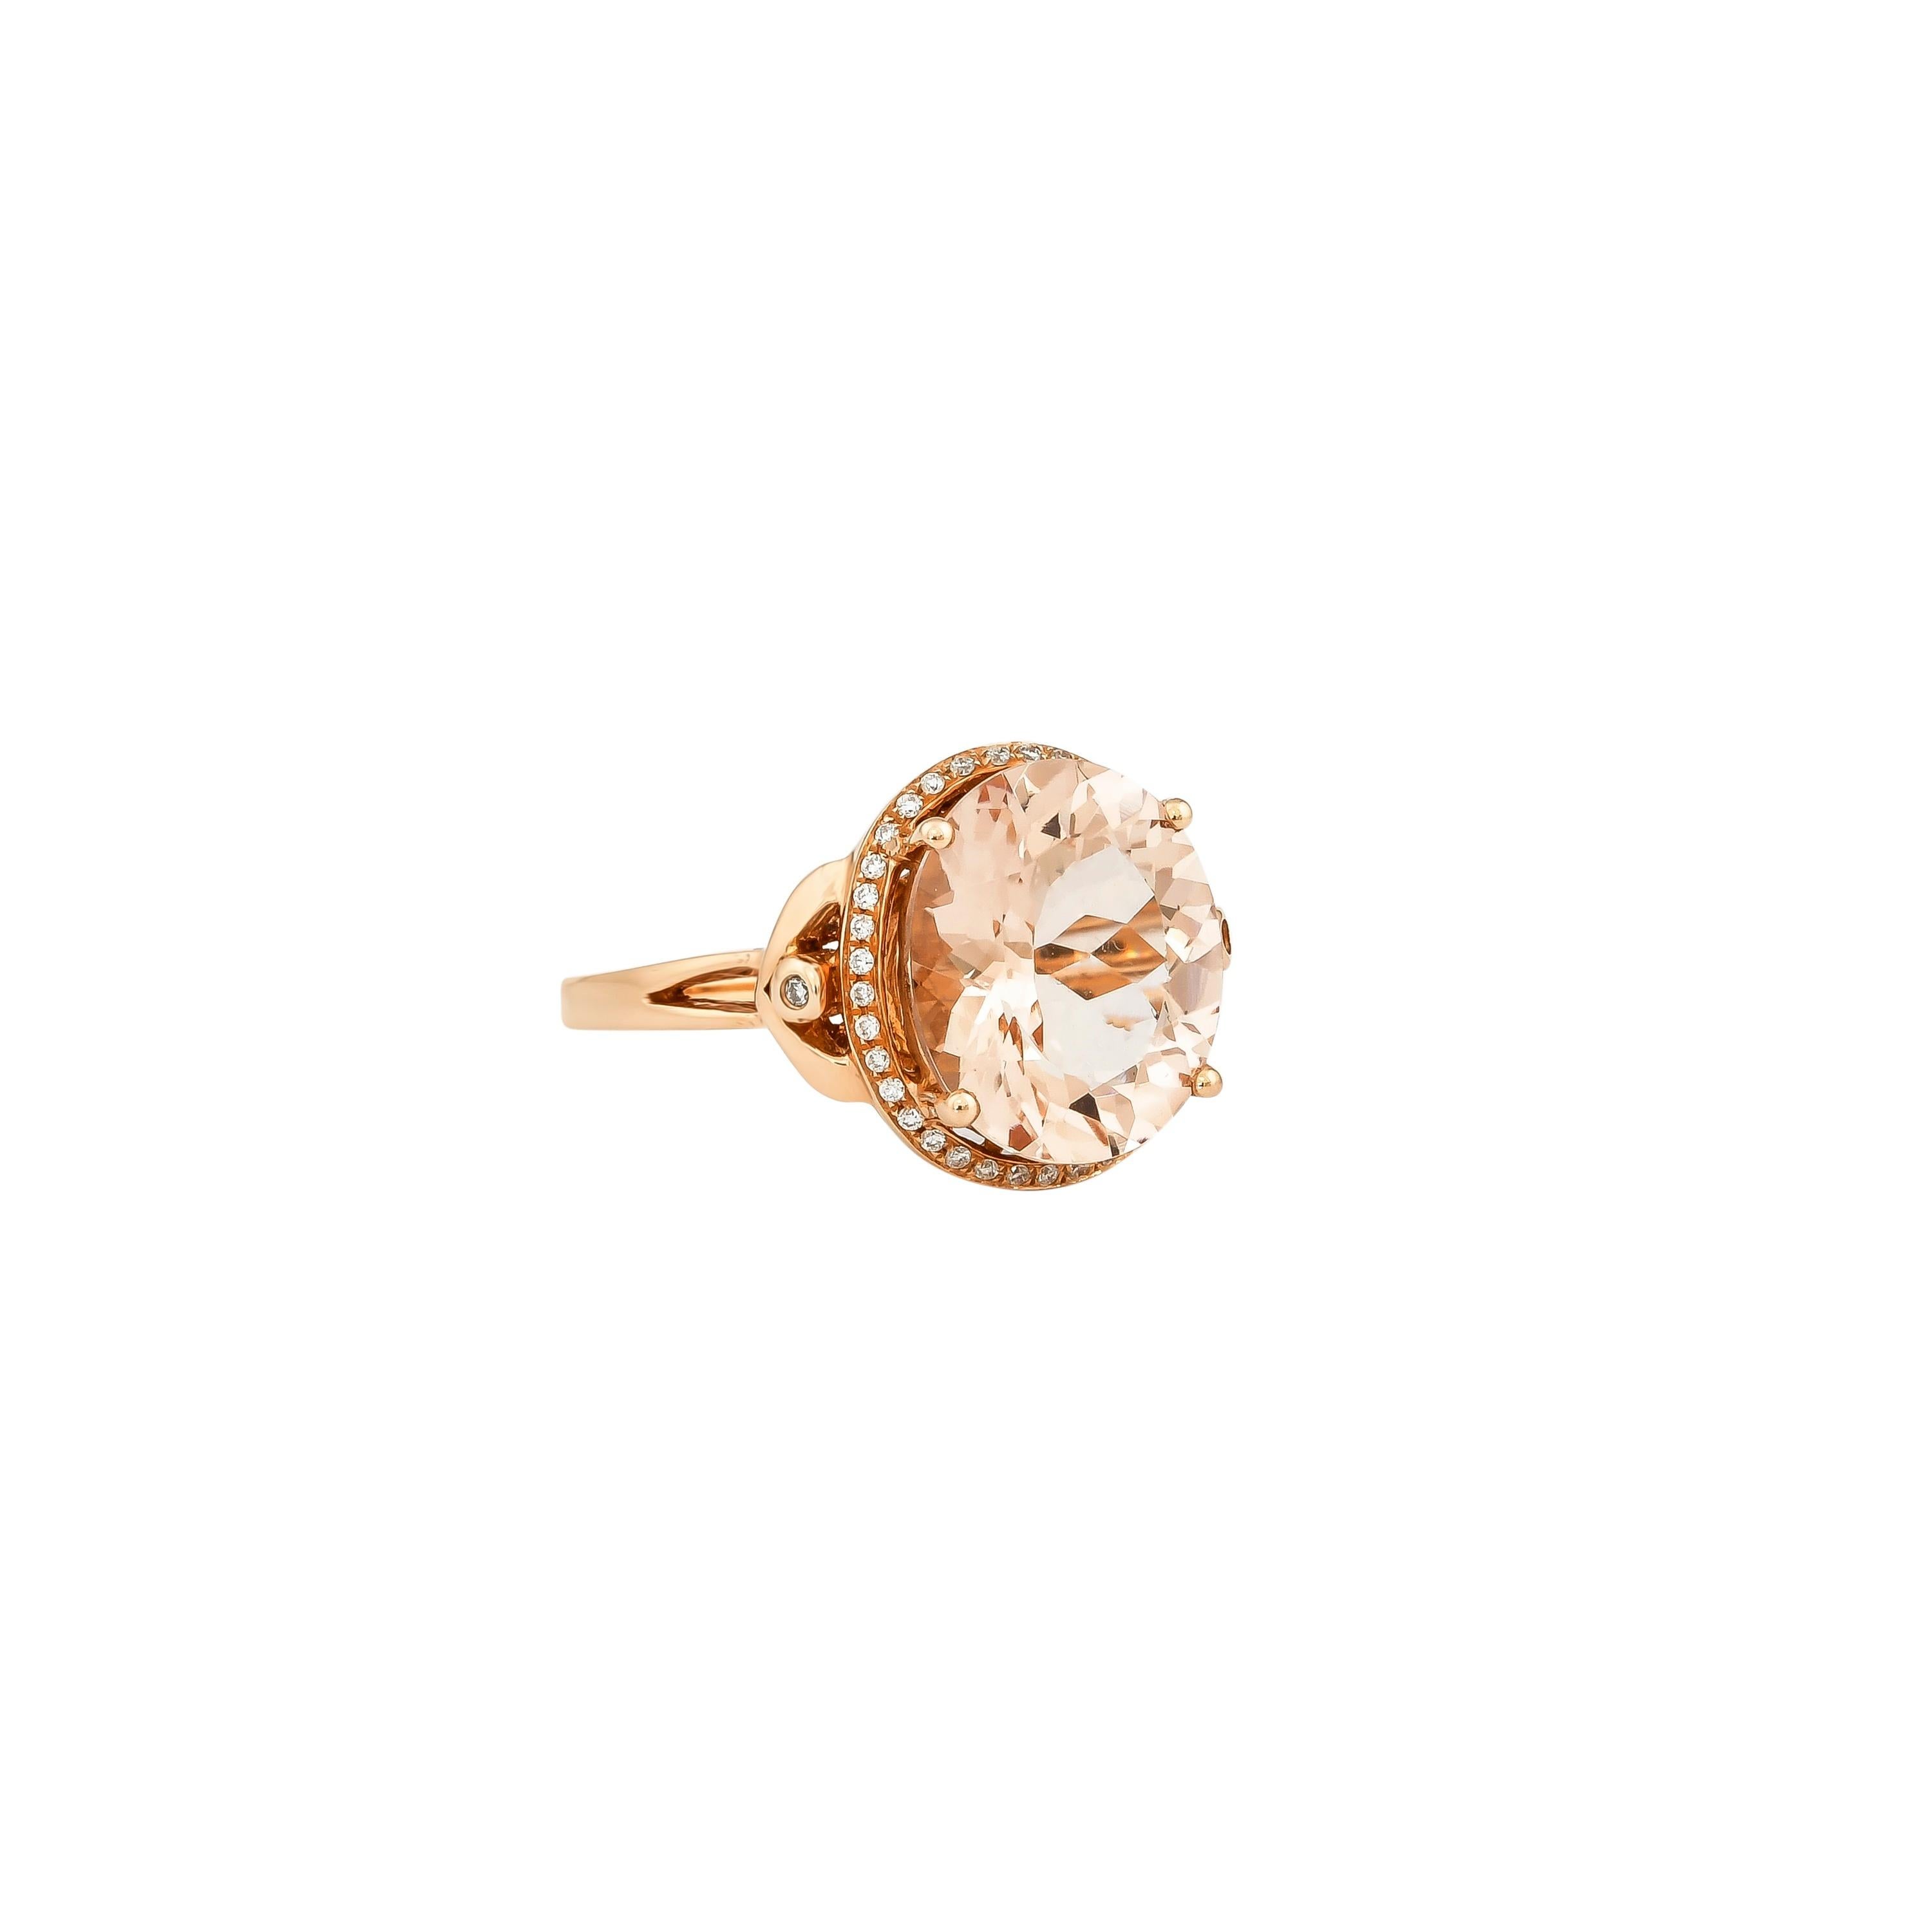 This collection features an array of magnificent morganites! Accented with diamonds these rings are made in rose gold and present a classic yet elegant look. 

Classic morganite ring in 18K rose gold with diamonds. 

Morganite: 3.92 carat oval